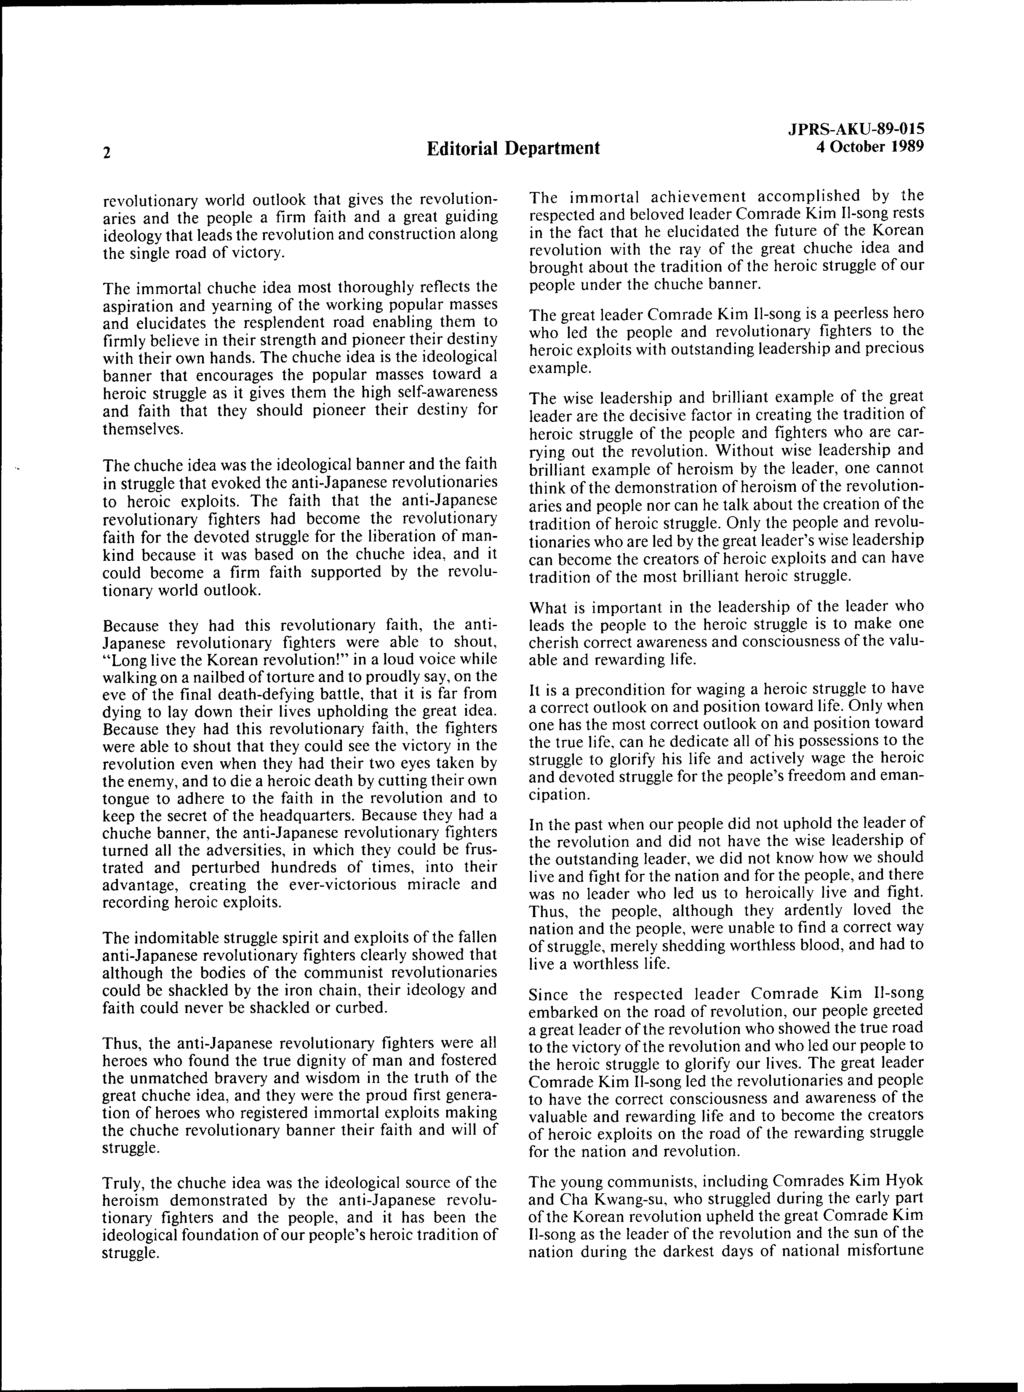 Editorial Department JPRS-AKU-89-015 4 October 1989 revolutionary world outlook that gives the revolutionaries and the people a firm faith and a great guiding ideology that leads the revolution and